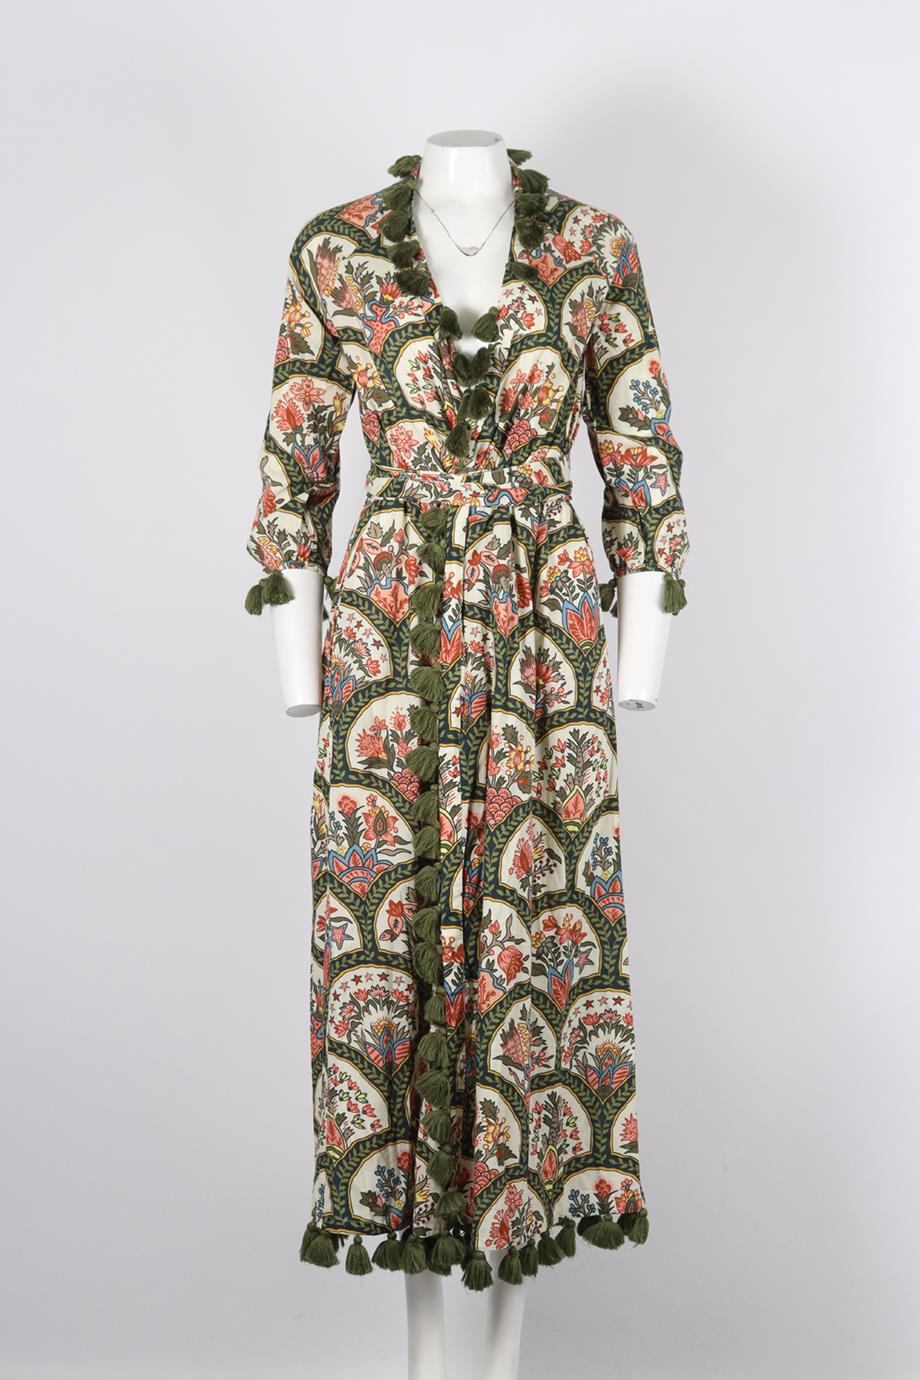 RHODE BELTED PRINTED COTTON ROBE XSMALL